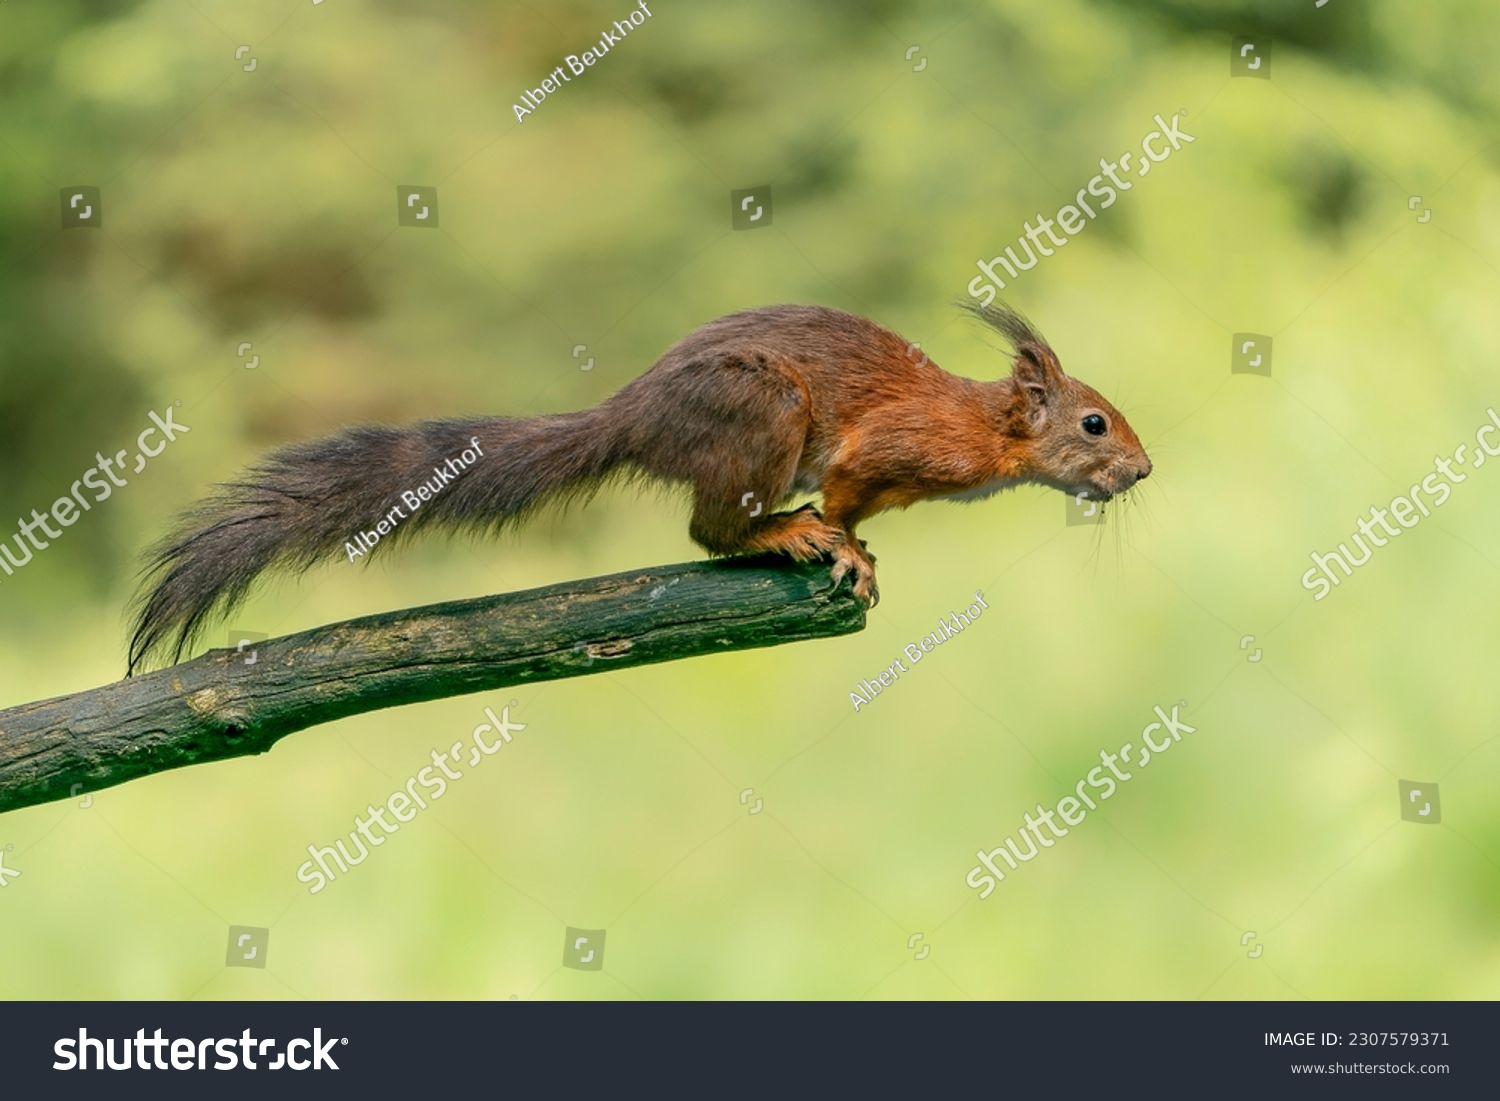 Beautiful Red Squirrel (Sciurus vulgaris) jumping in the forest of Noord Brabant in the Netherlands.
                                                                                                    #2307579371